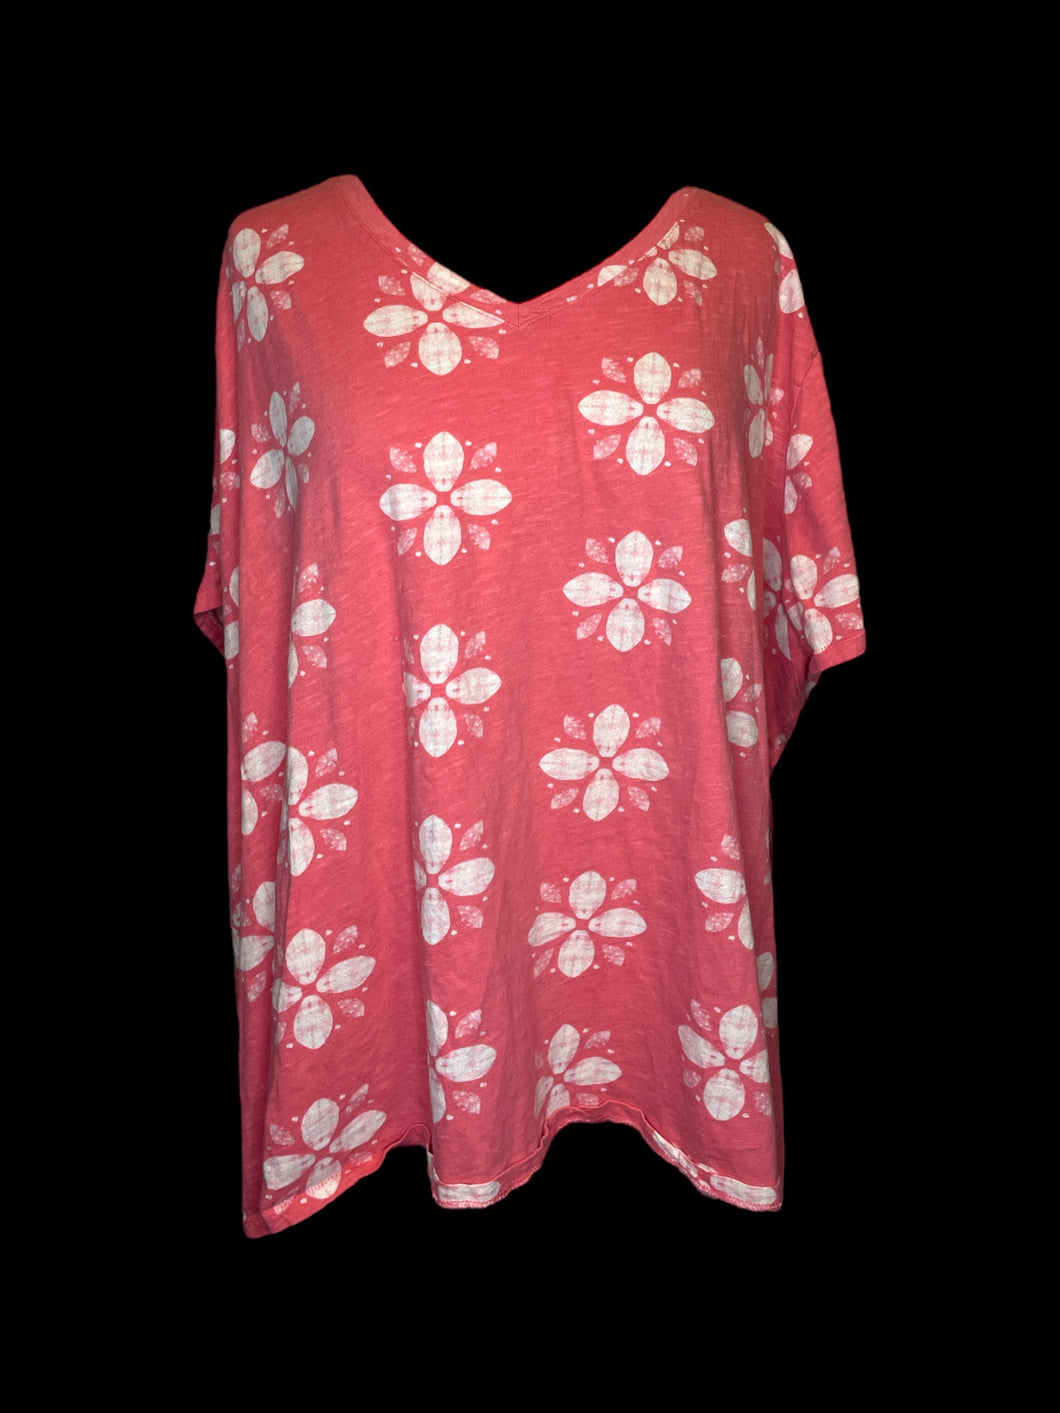 6X Coral short sleeve top w/ white floral pattern